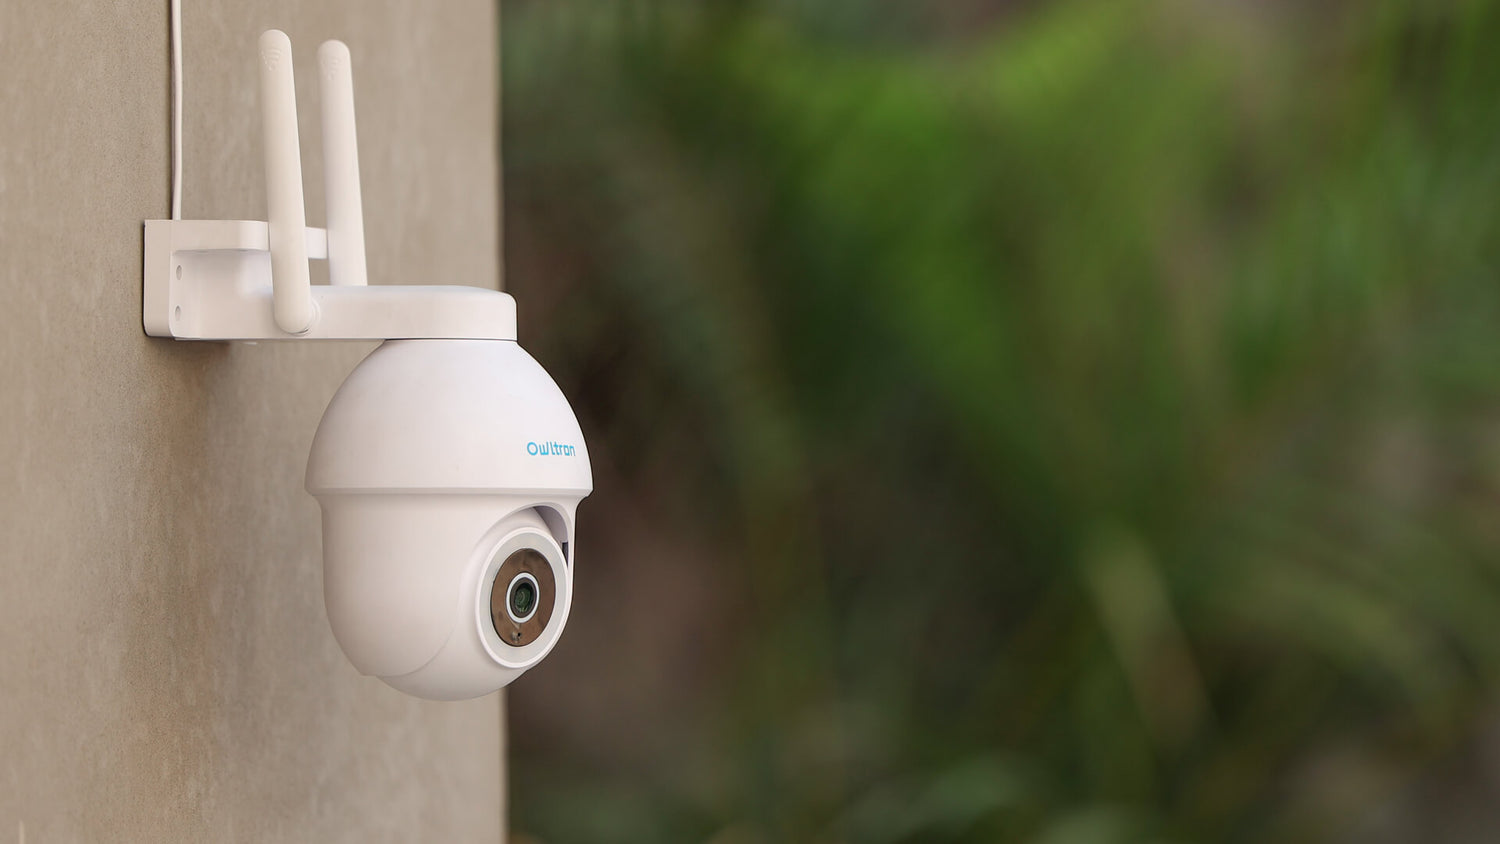 YI Home Camera, 720P Wireless IP Video Suveillance System with Night V –  Click.com.bn